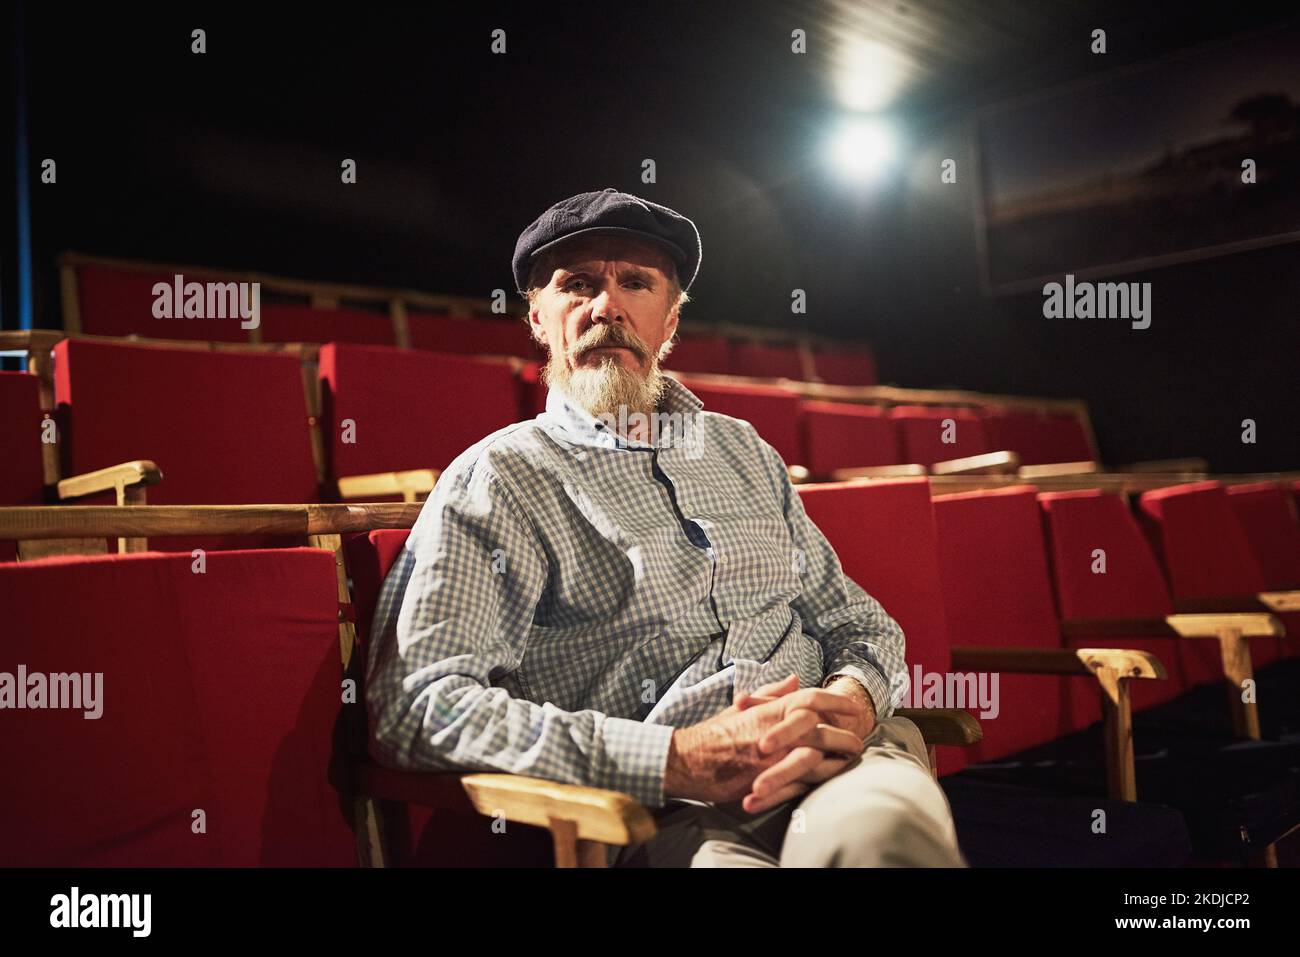 Hes a seasoned cinephile. Portrait of a confident senior man sitting alone in an empty movie theatre. Stock Photo